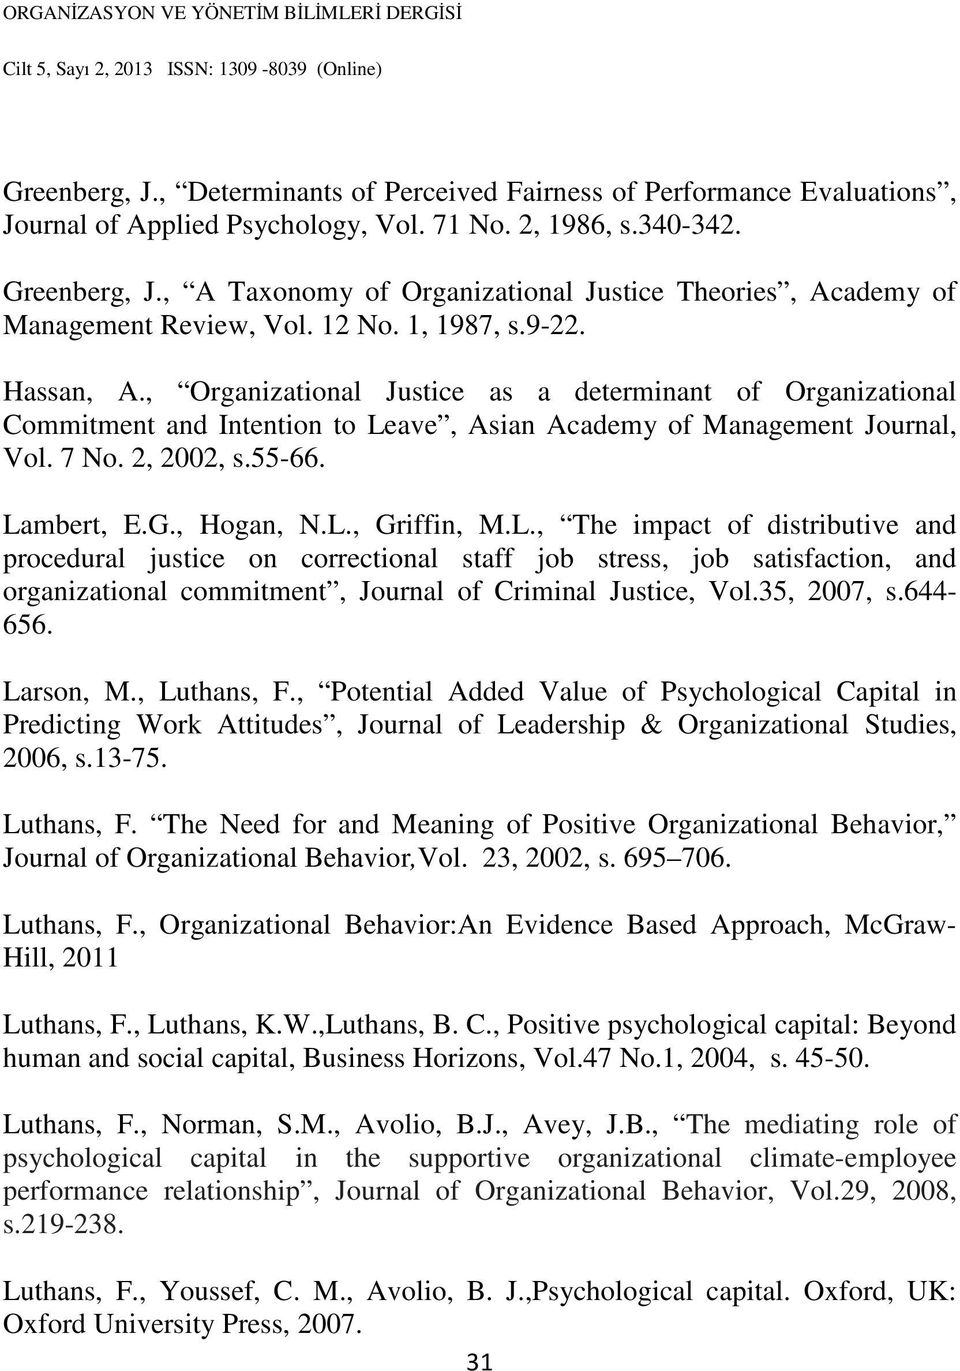 , Organizational Justice as a determinant of Organizational Commitment and Intention to Leave, Asian Academy of Management Journal, Vol. 7 No. 2, 2002, s.55-66. Lambert, E.G., Hogan, N.L., Griffin, M.